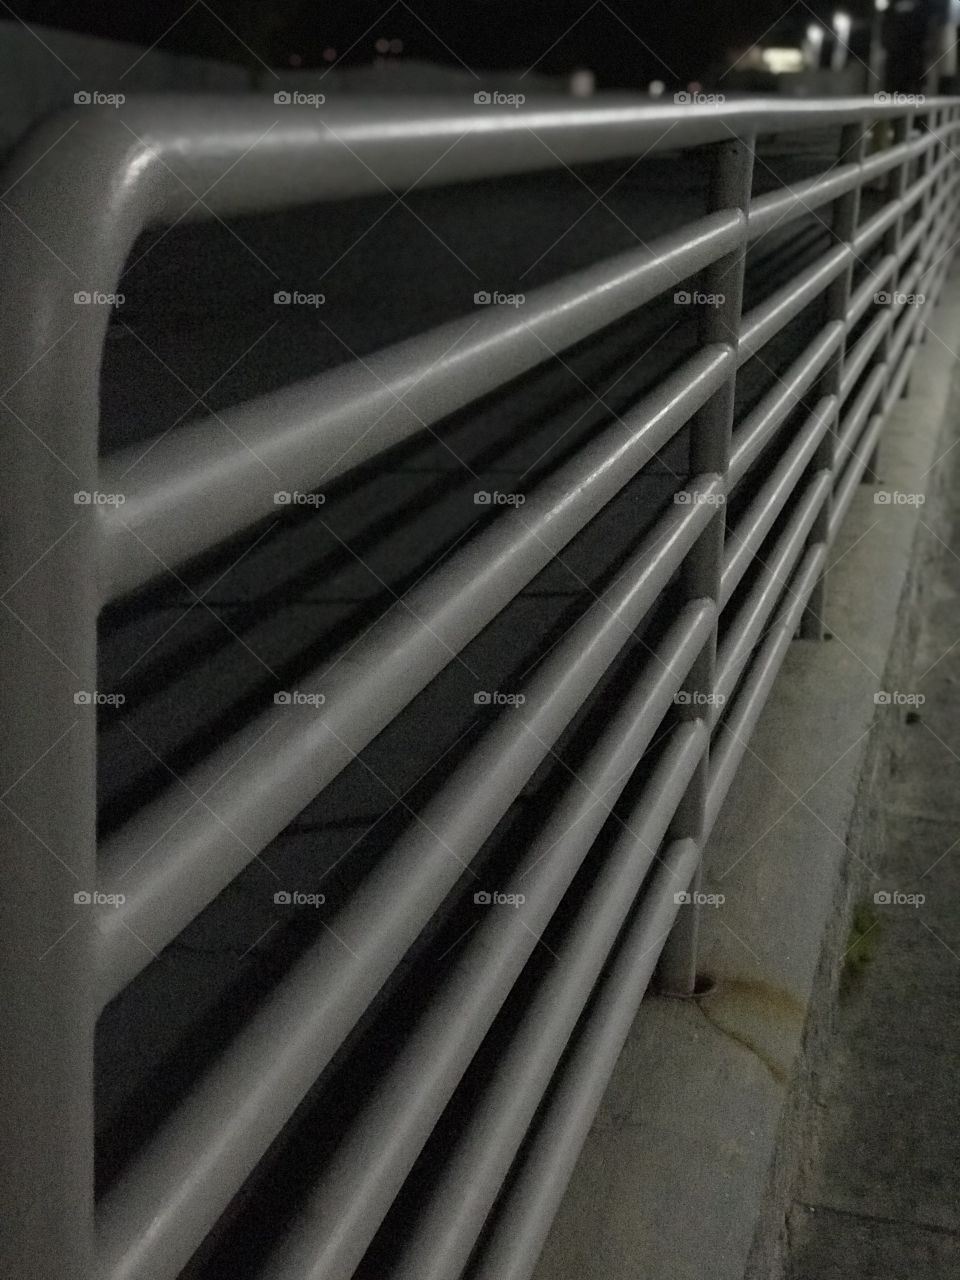 Railing behind my place of work